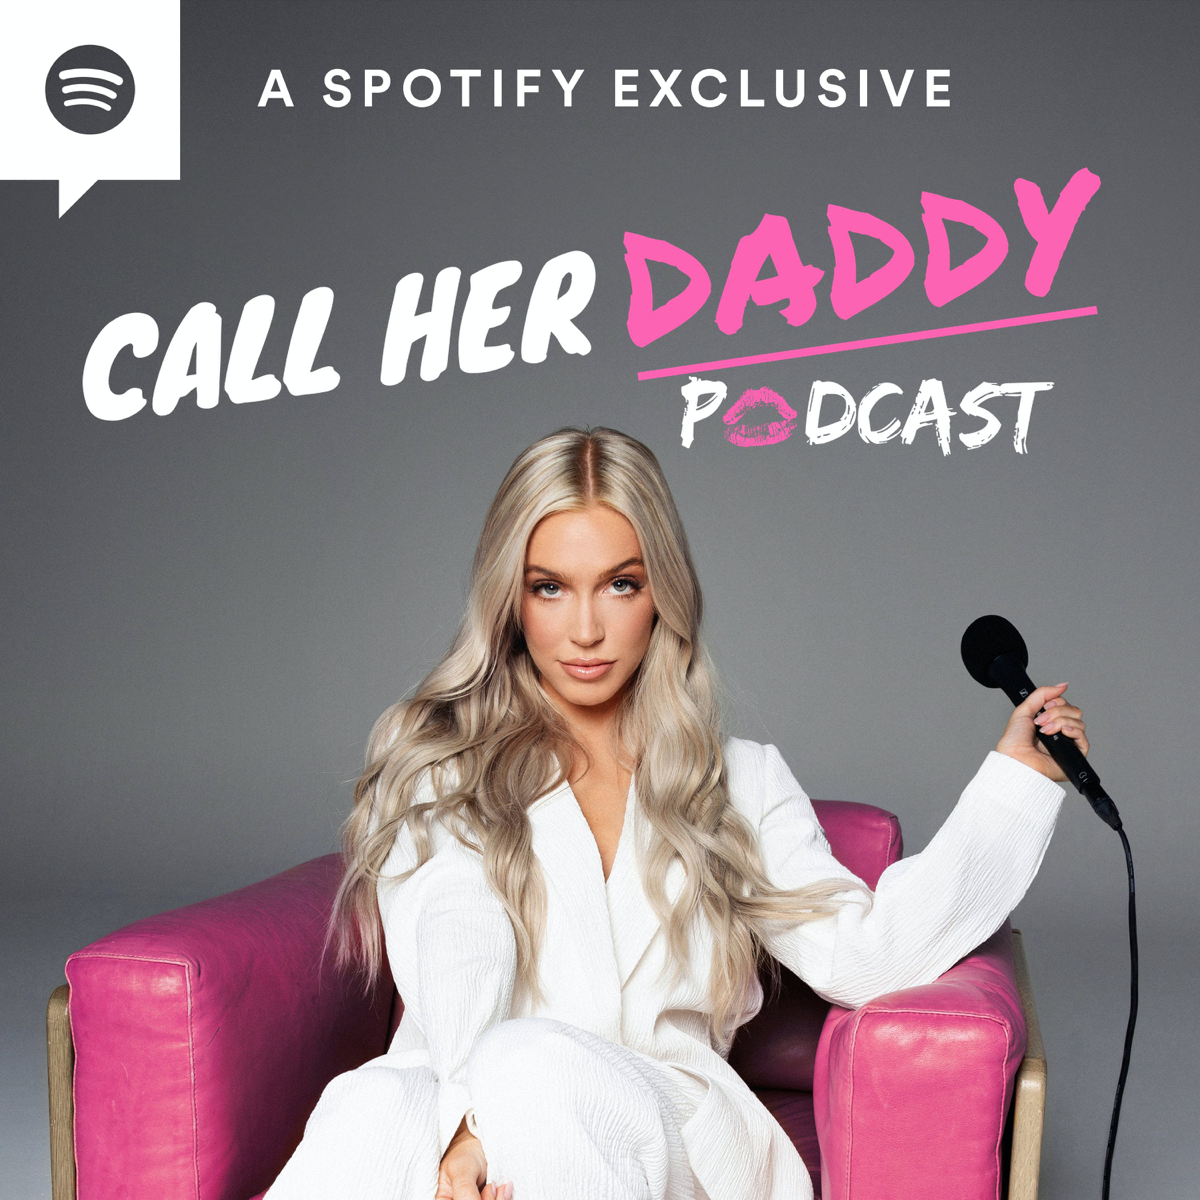 Miley Cyrus Hot Blonde Pussy - The 10 Best Call Her Daddy Podcast Episodes | Podyssey